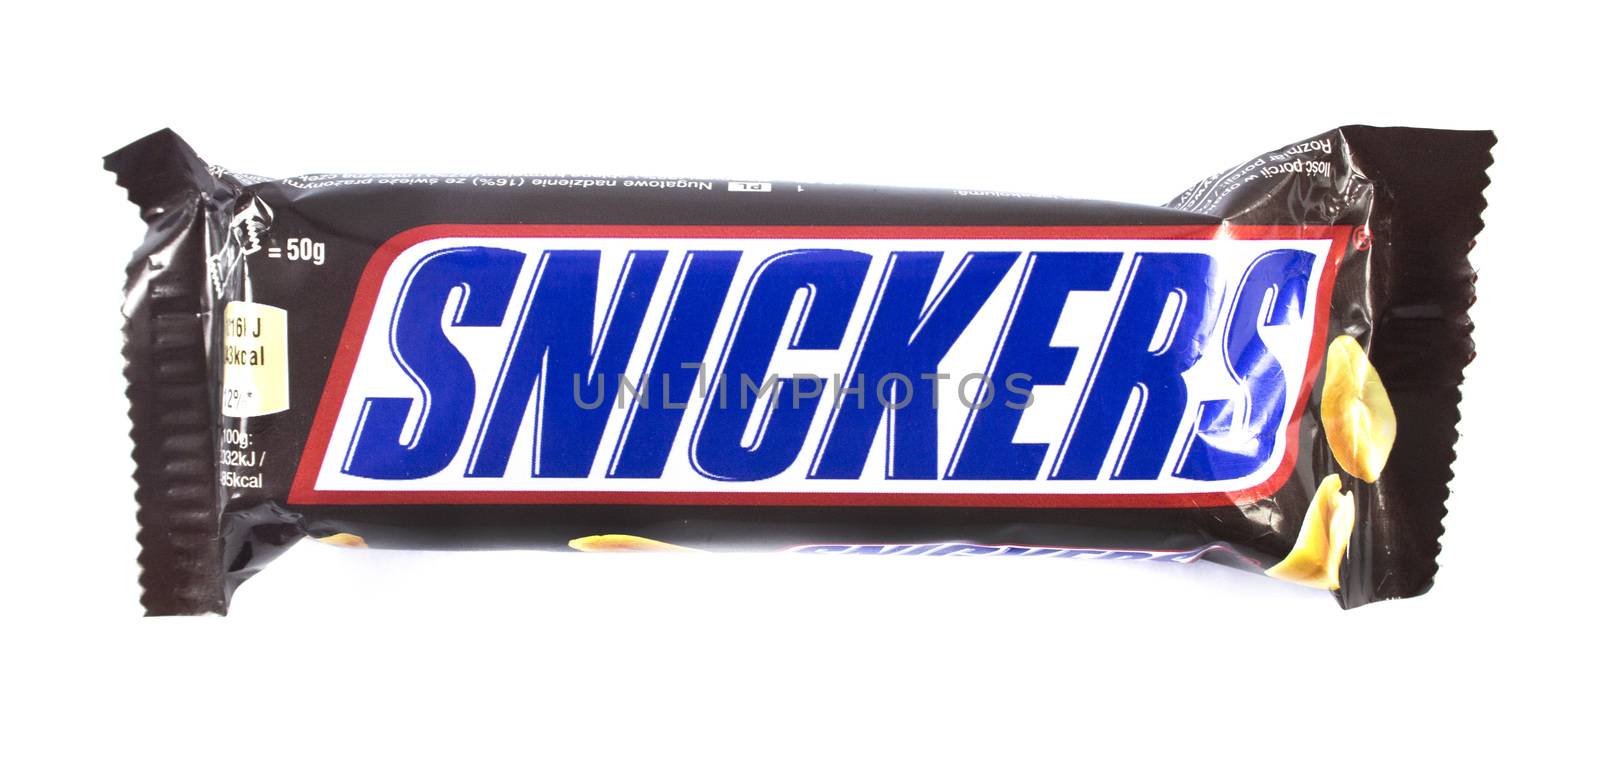 Amman, Jordan - December 5, 2014: Snickers chocolate bar isolated on white background. Snickers chocolate bar made by Mars, Incorporated.